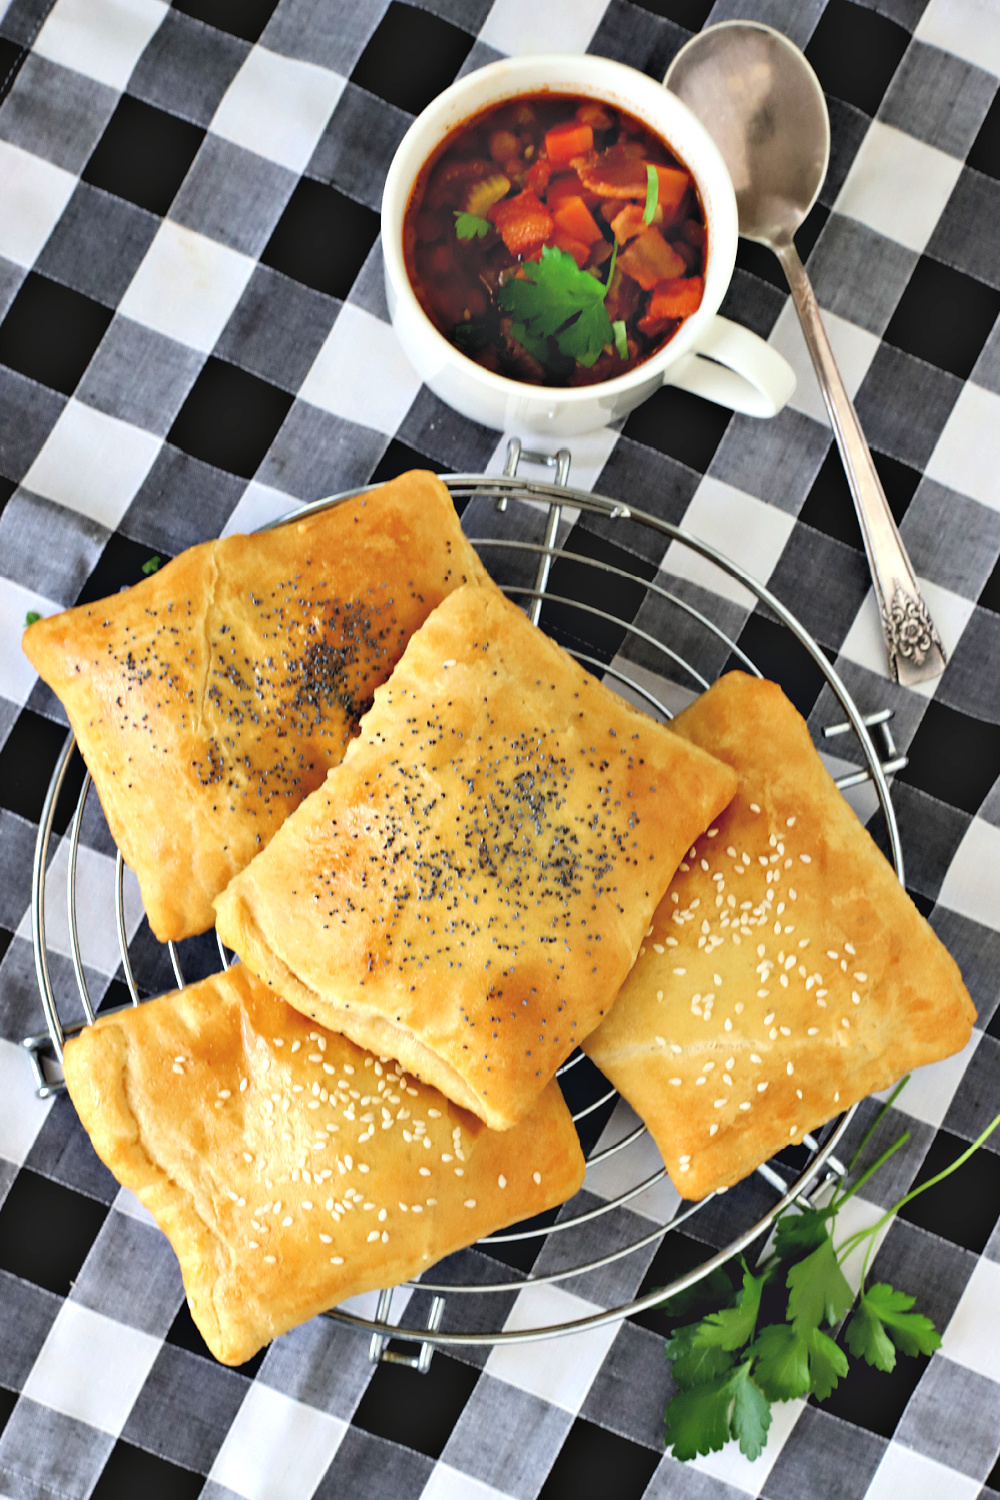 Easy recipe for ham & cheese hand pies are a quick and easy lunch or dinner hot sandwich. Fill crescent roll dough with Swiss, cheddar or American cheese, sprinkle with poppy or sesame seeds, if desired and bake!